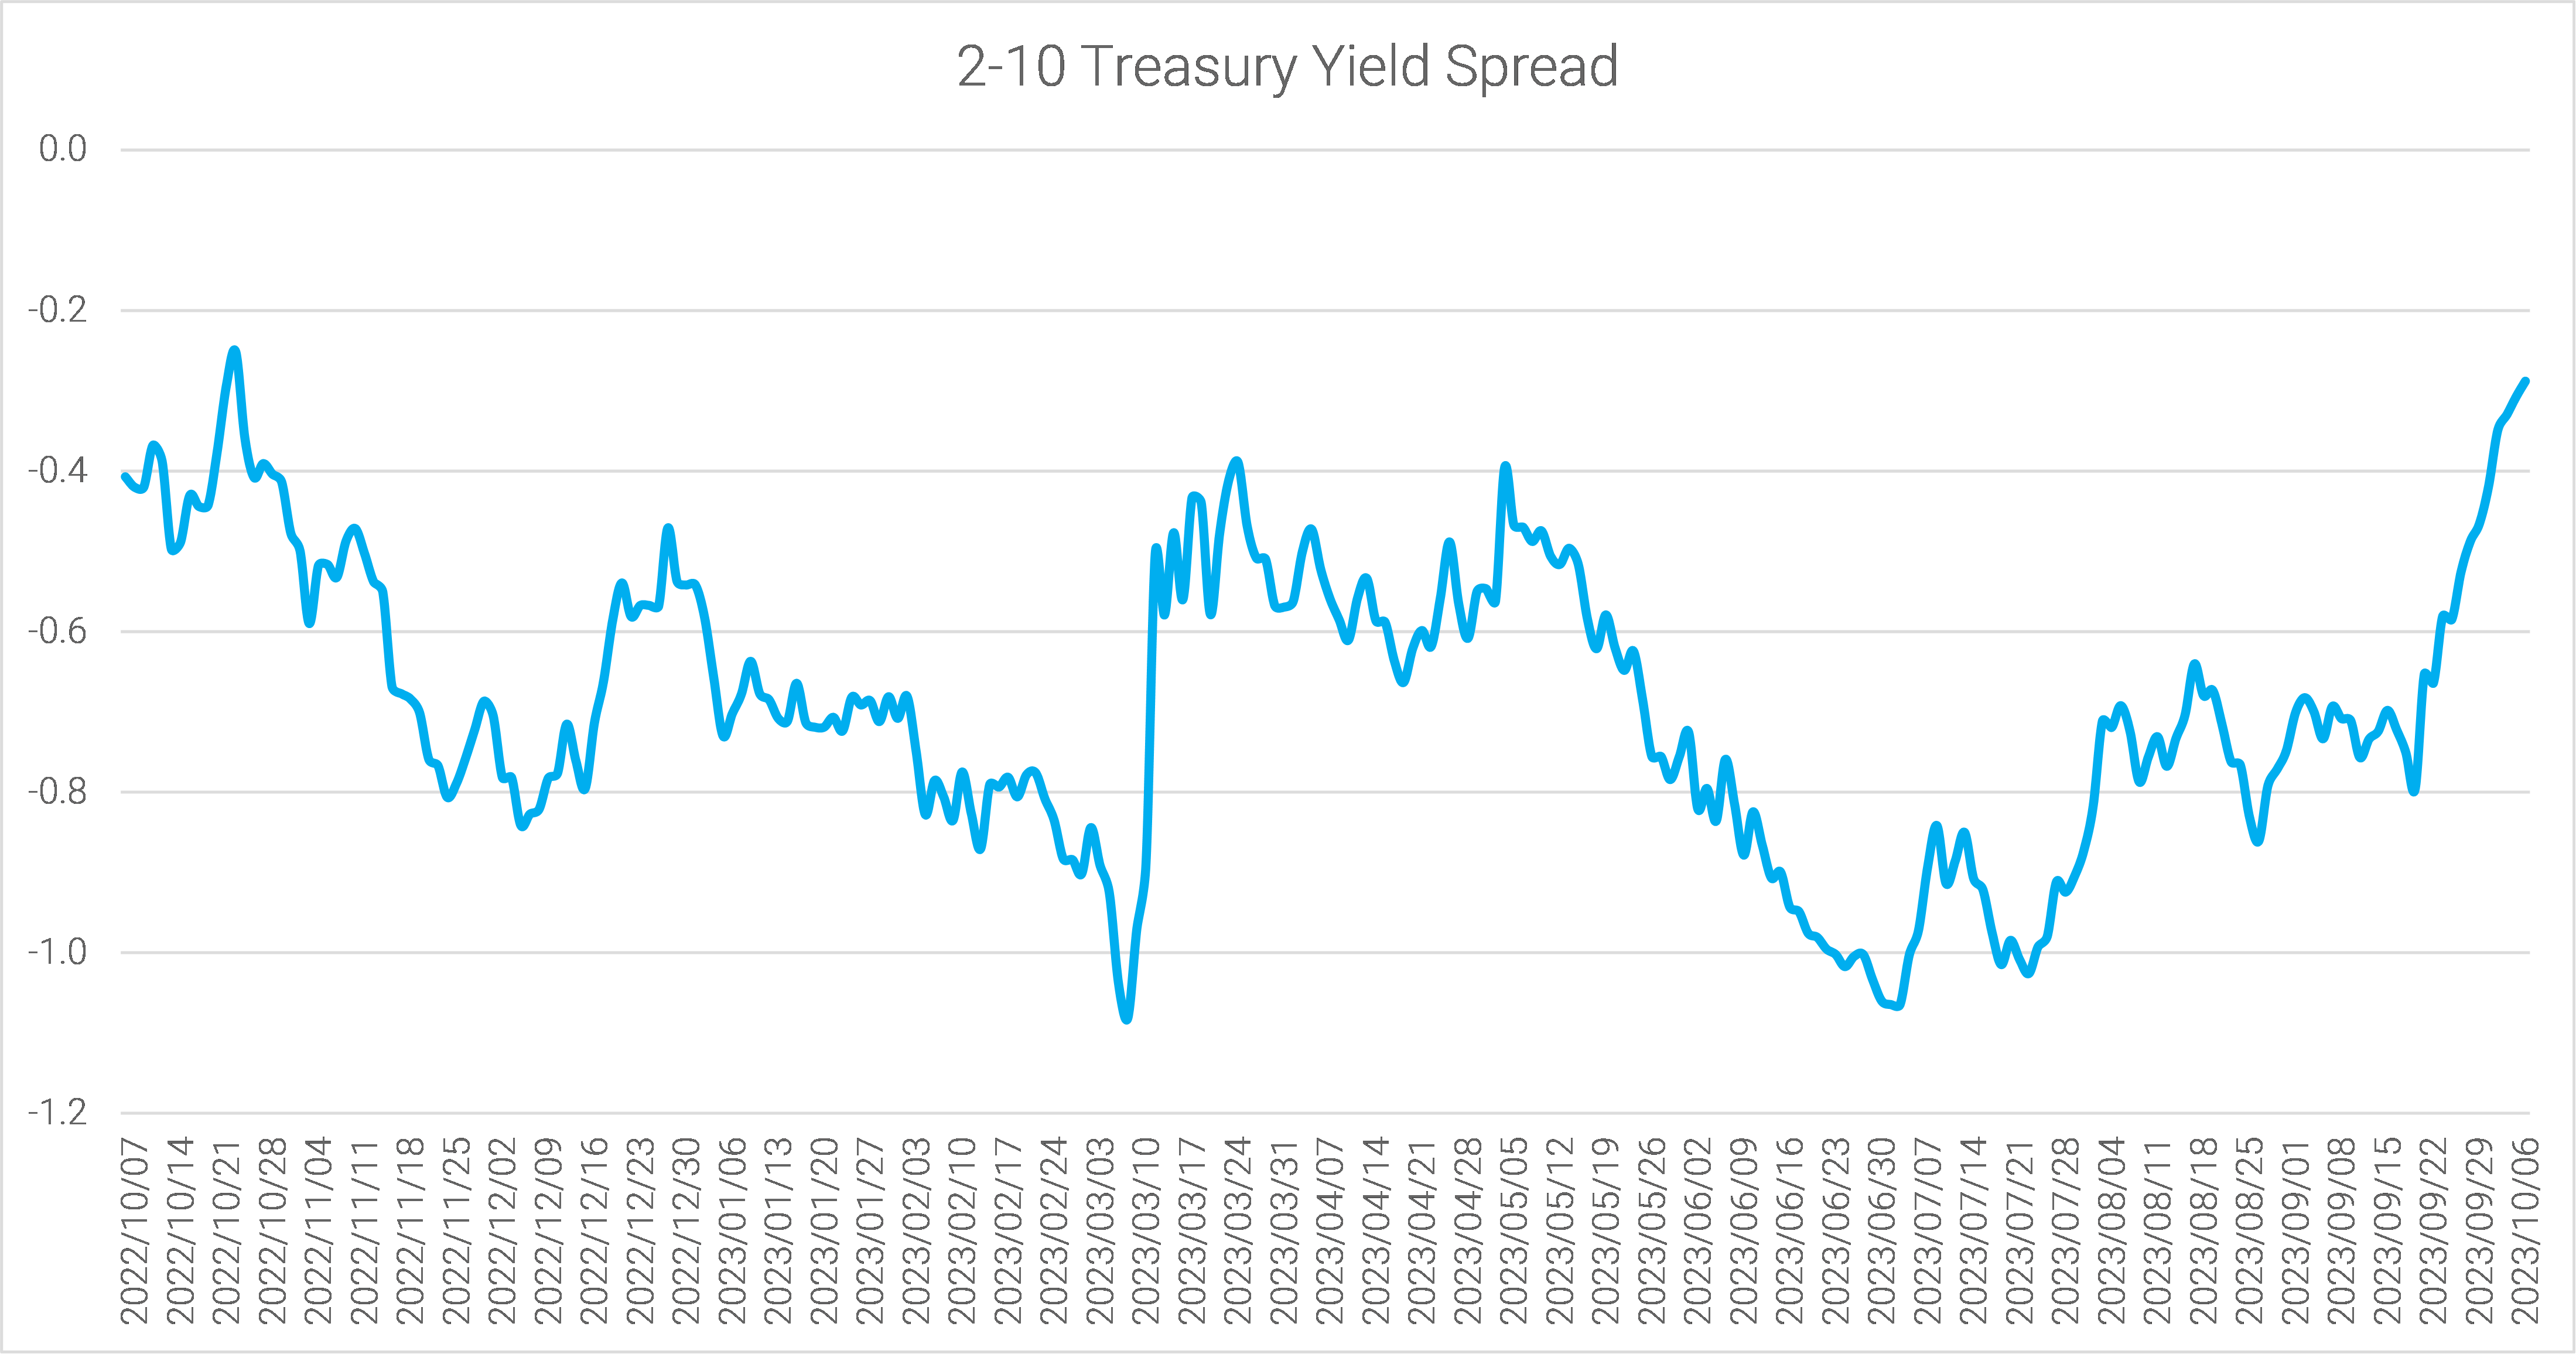 06-the-2-10-spread-narrowed-by-19-bps-last-week-to-minus-47-bps